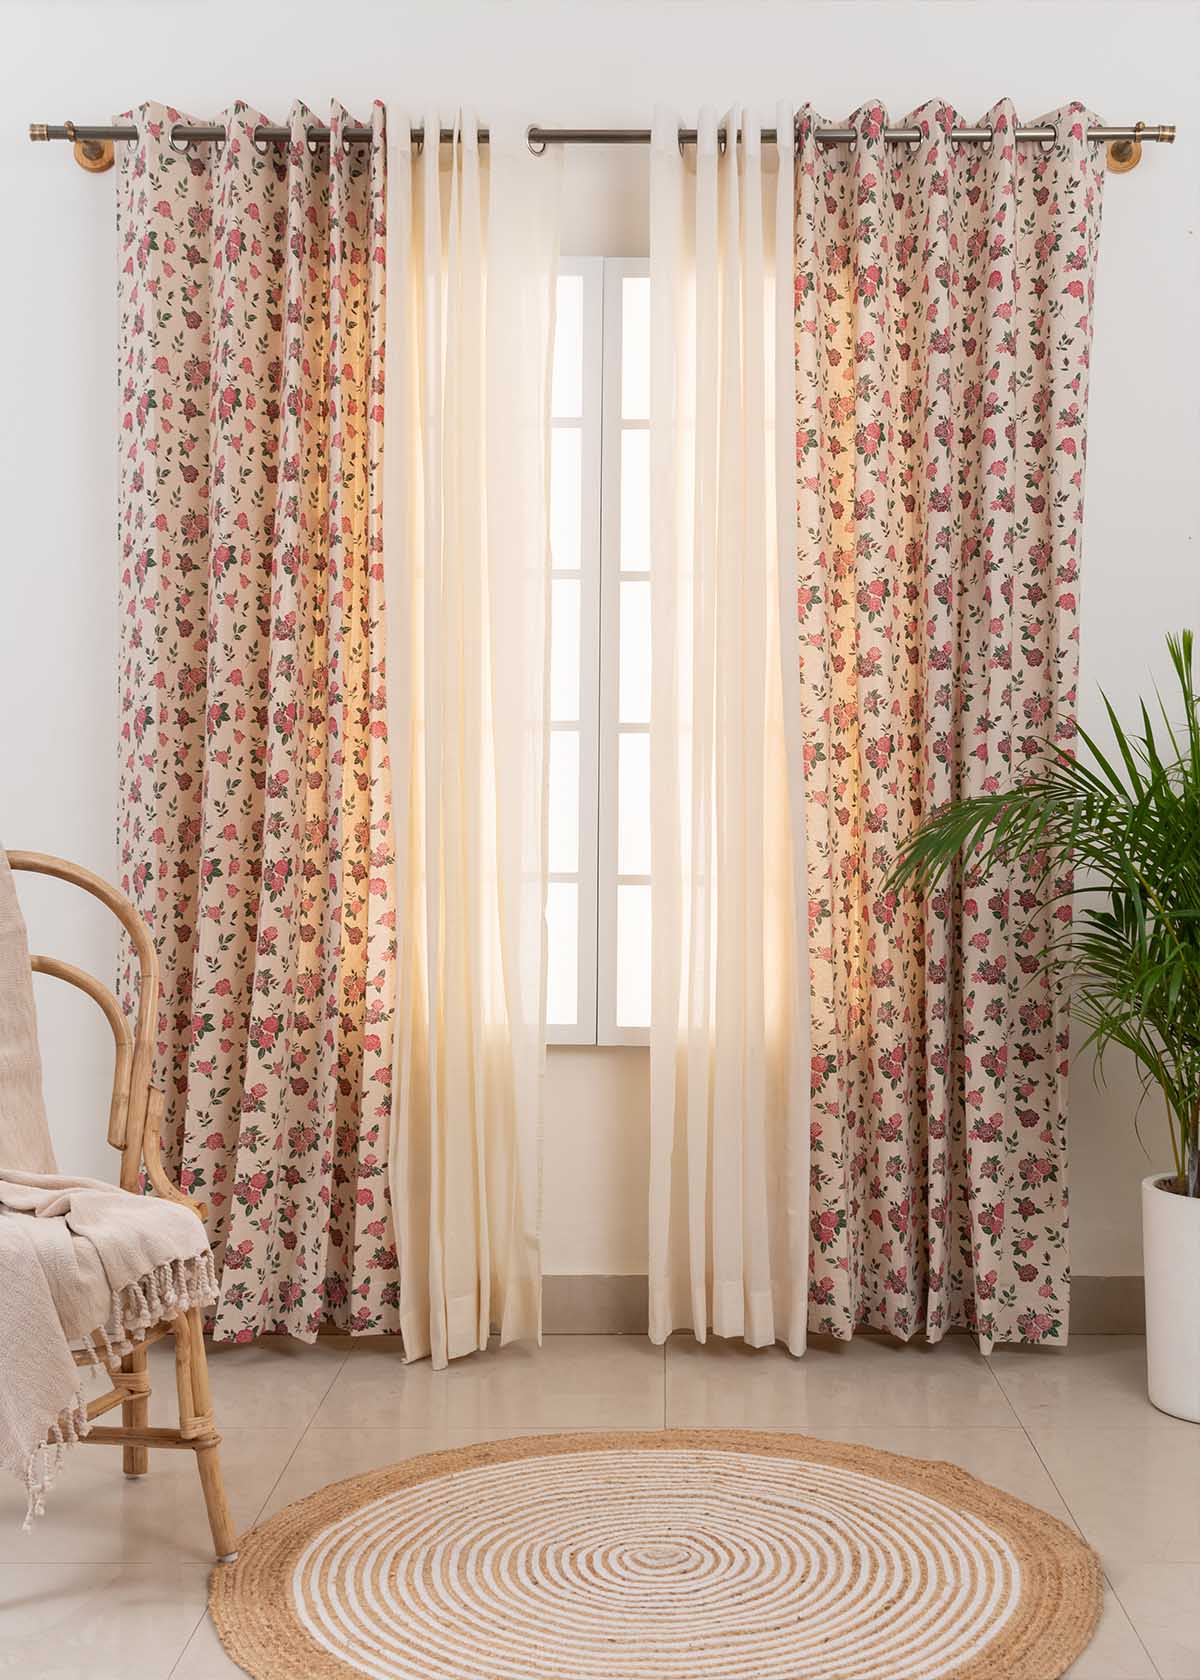 Wild Roses, Cream Sheer Set Of 4 Combo Cotton Curtain - Red And Cream